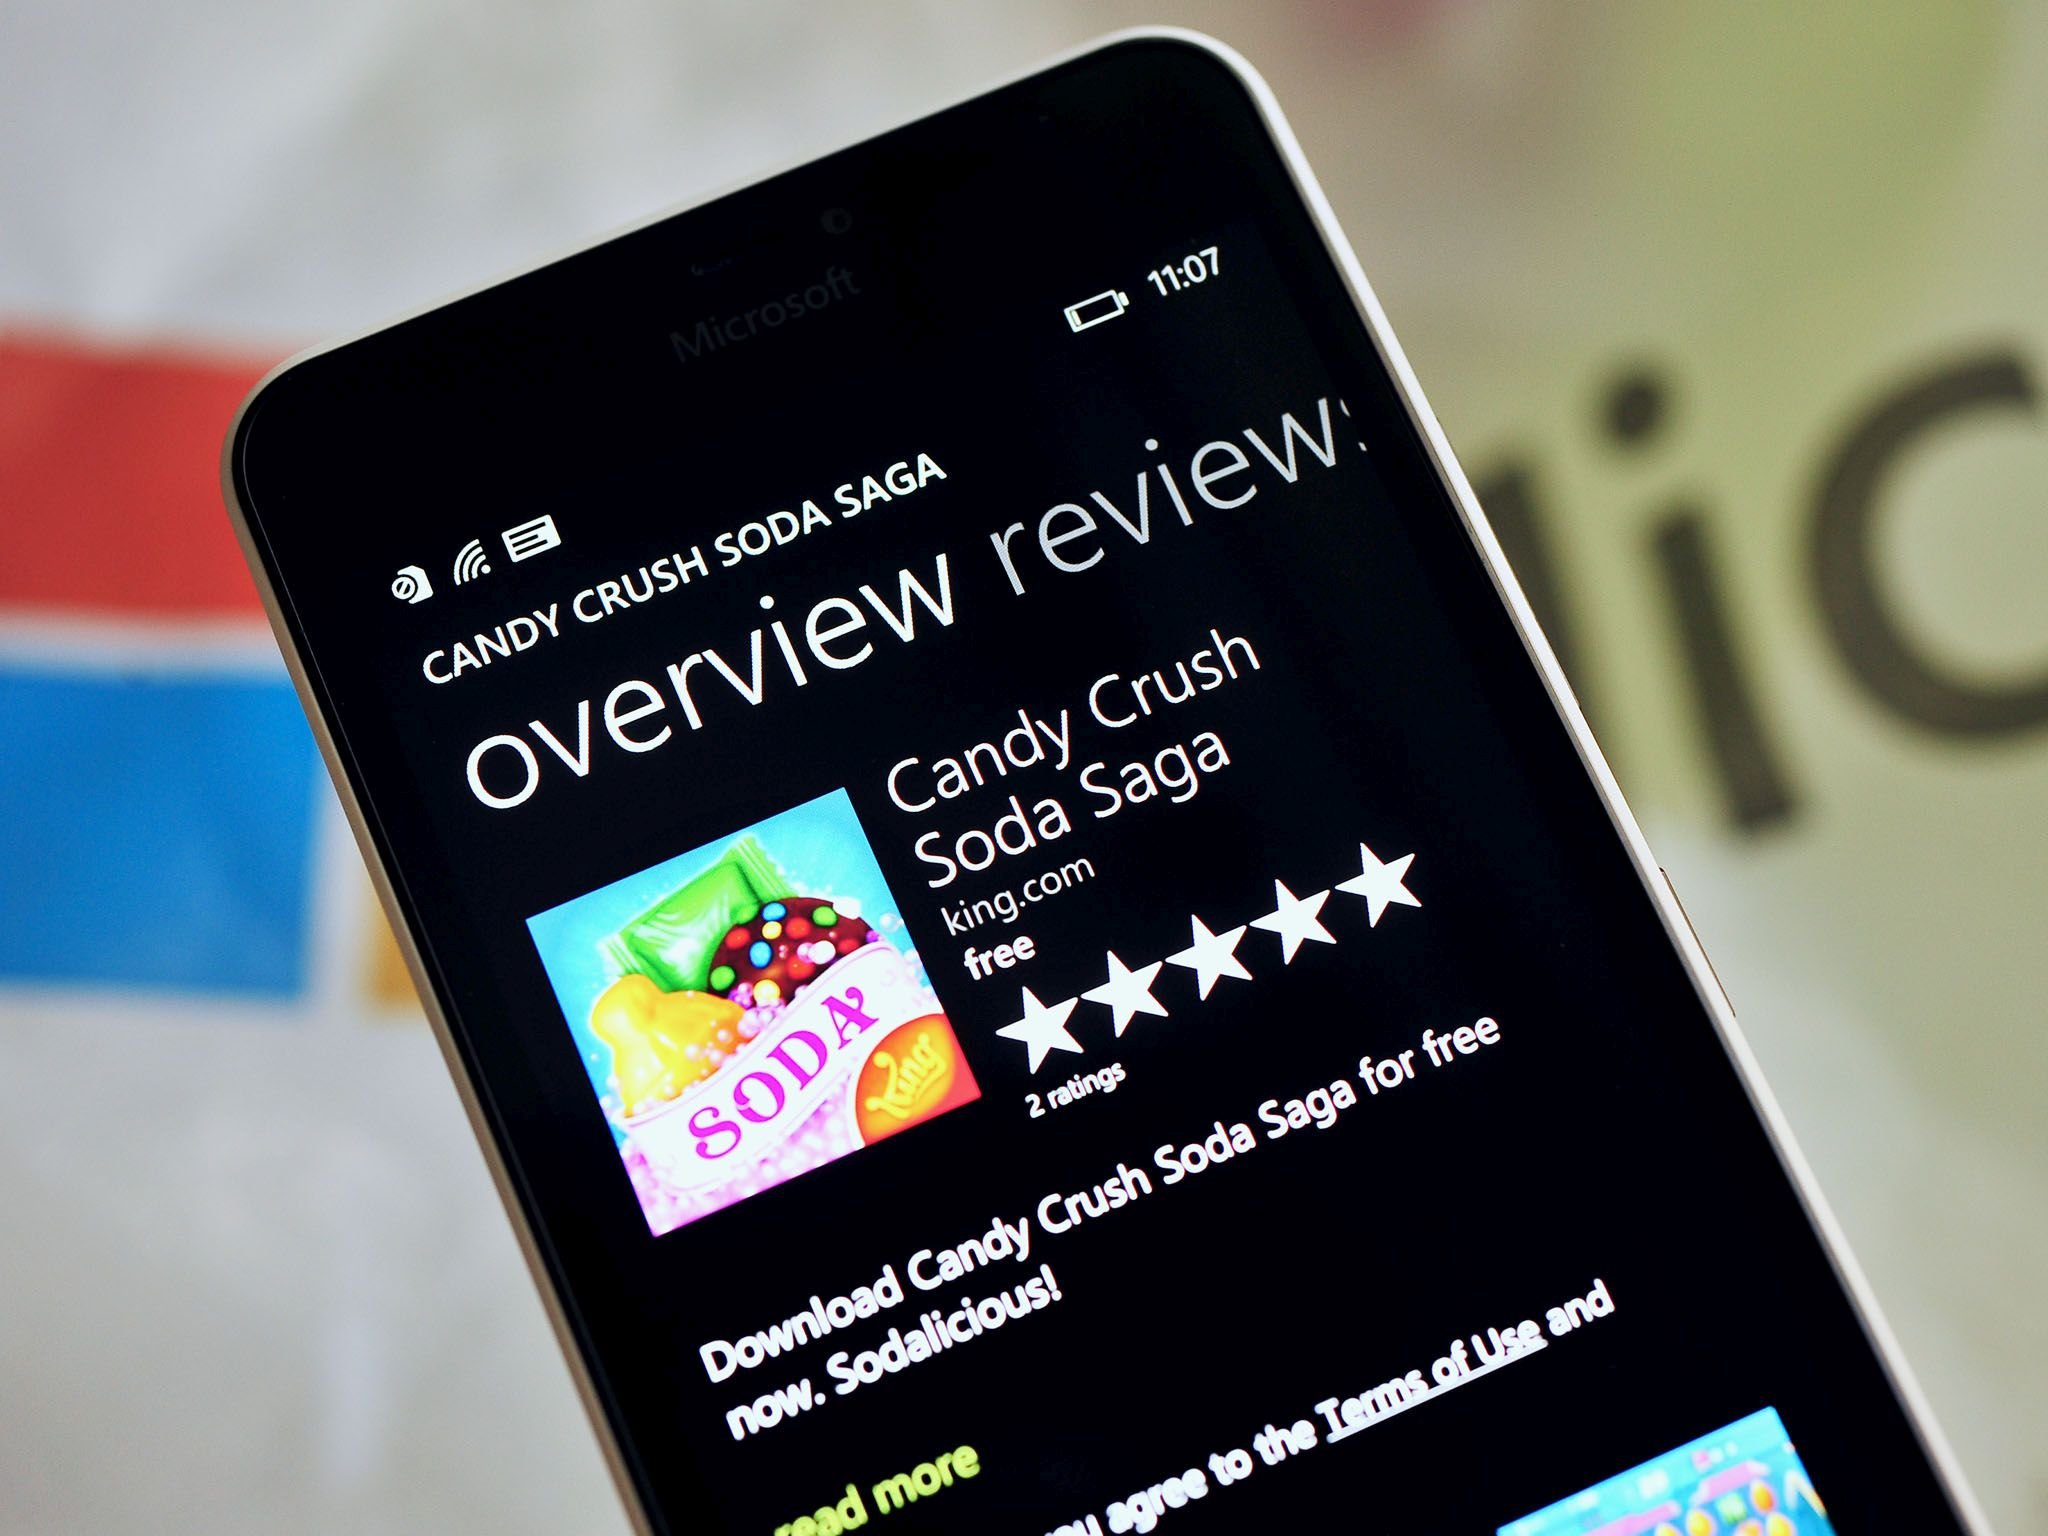 How to play candy crush in xbox in Windows 10 